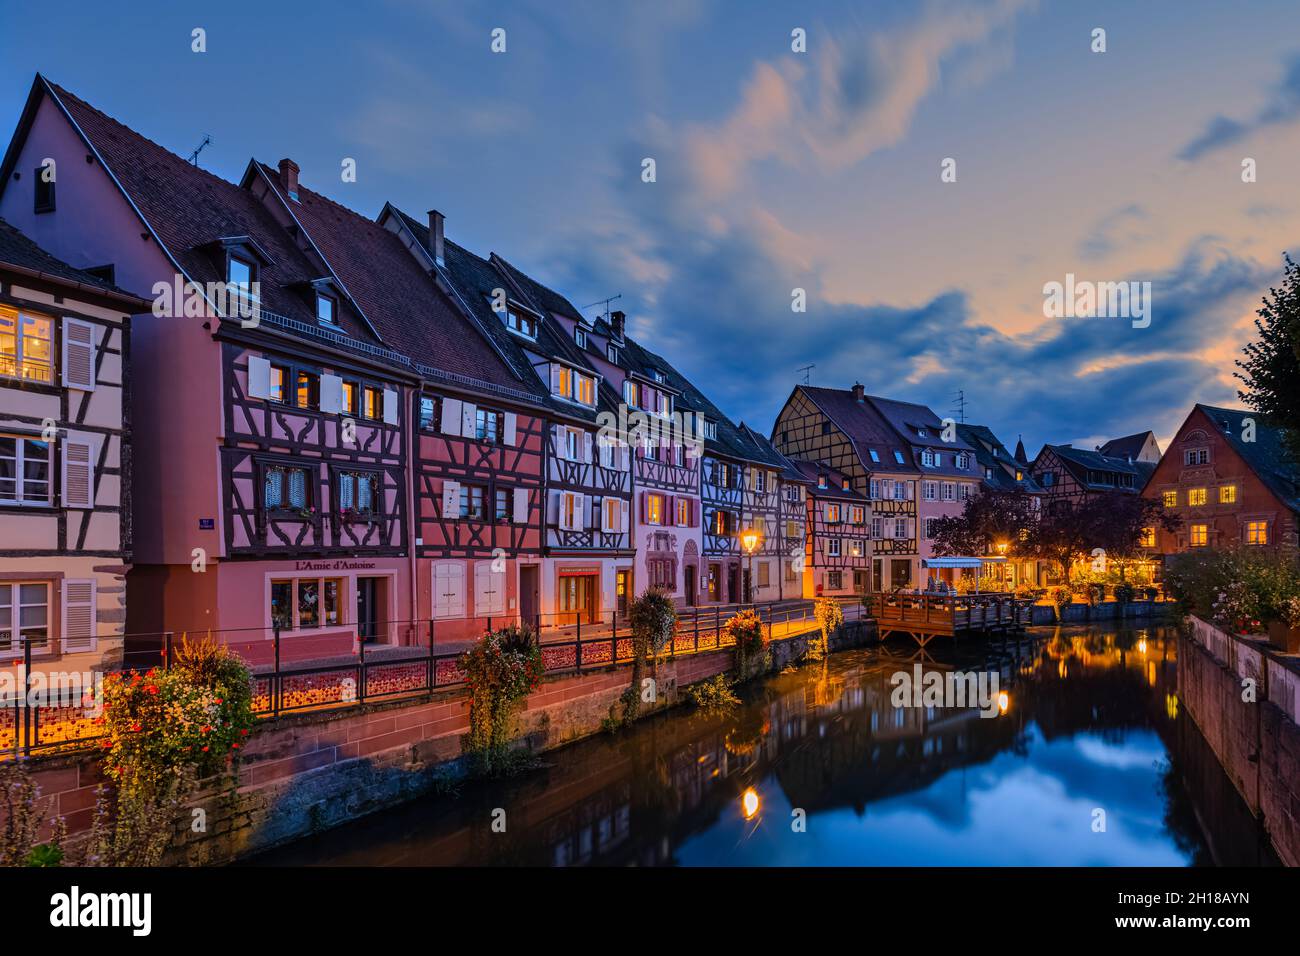 An evening at Colmar, with traditional colorful half-timbered houses in the Alsace region, France. Colmar is a city and commune in the Haut-Rhin depar Stock Photo